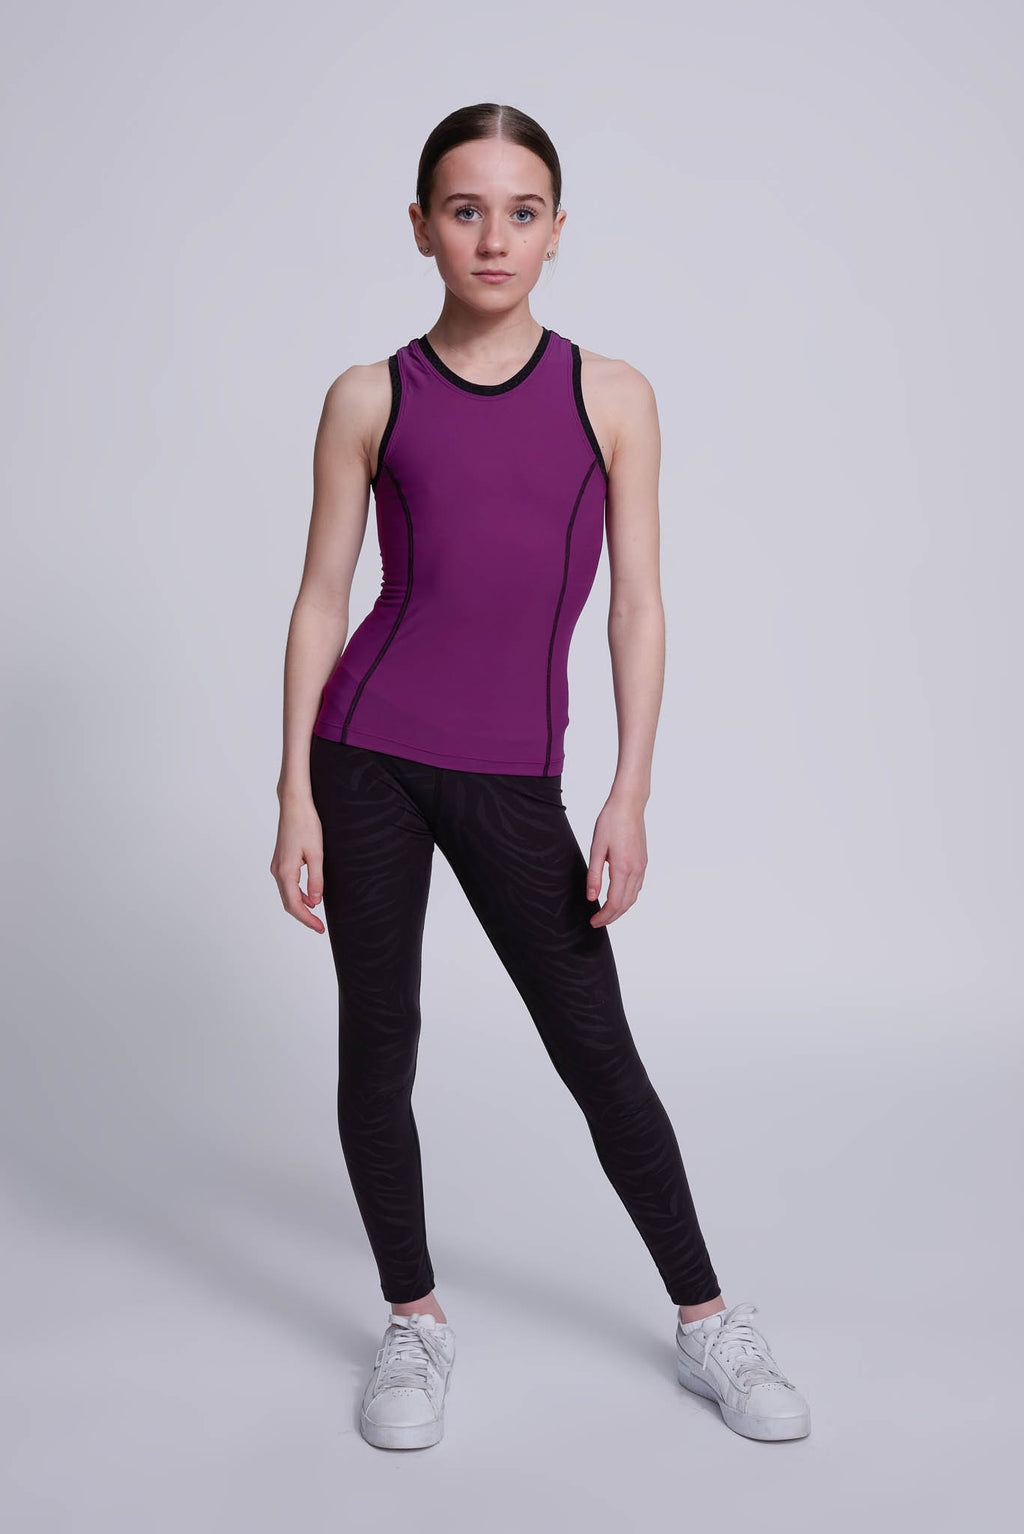 Chique Sport - Our Desire tank top is back and better than